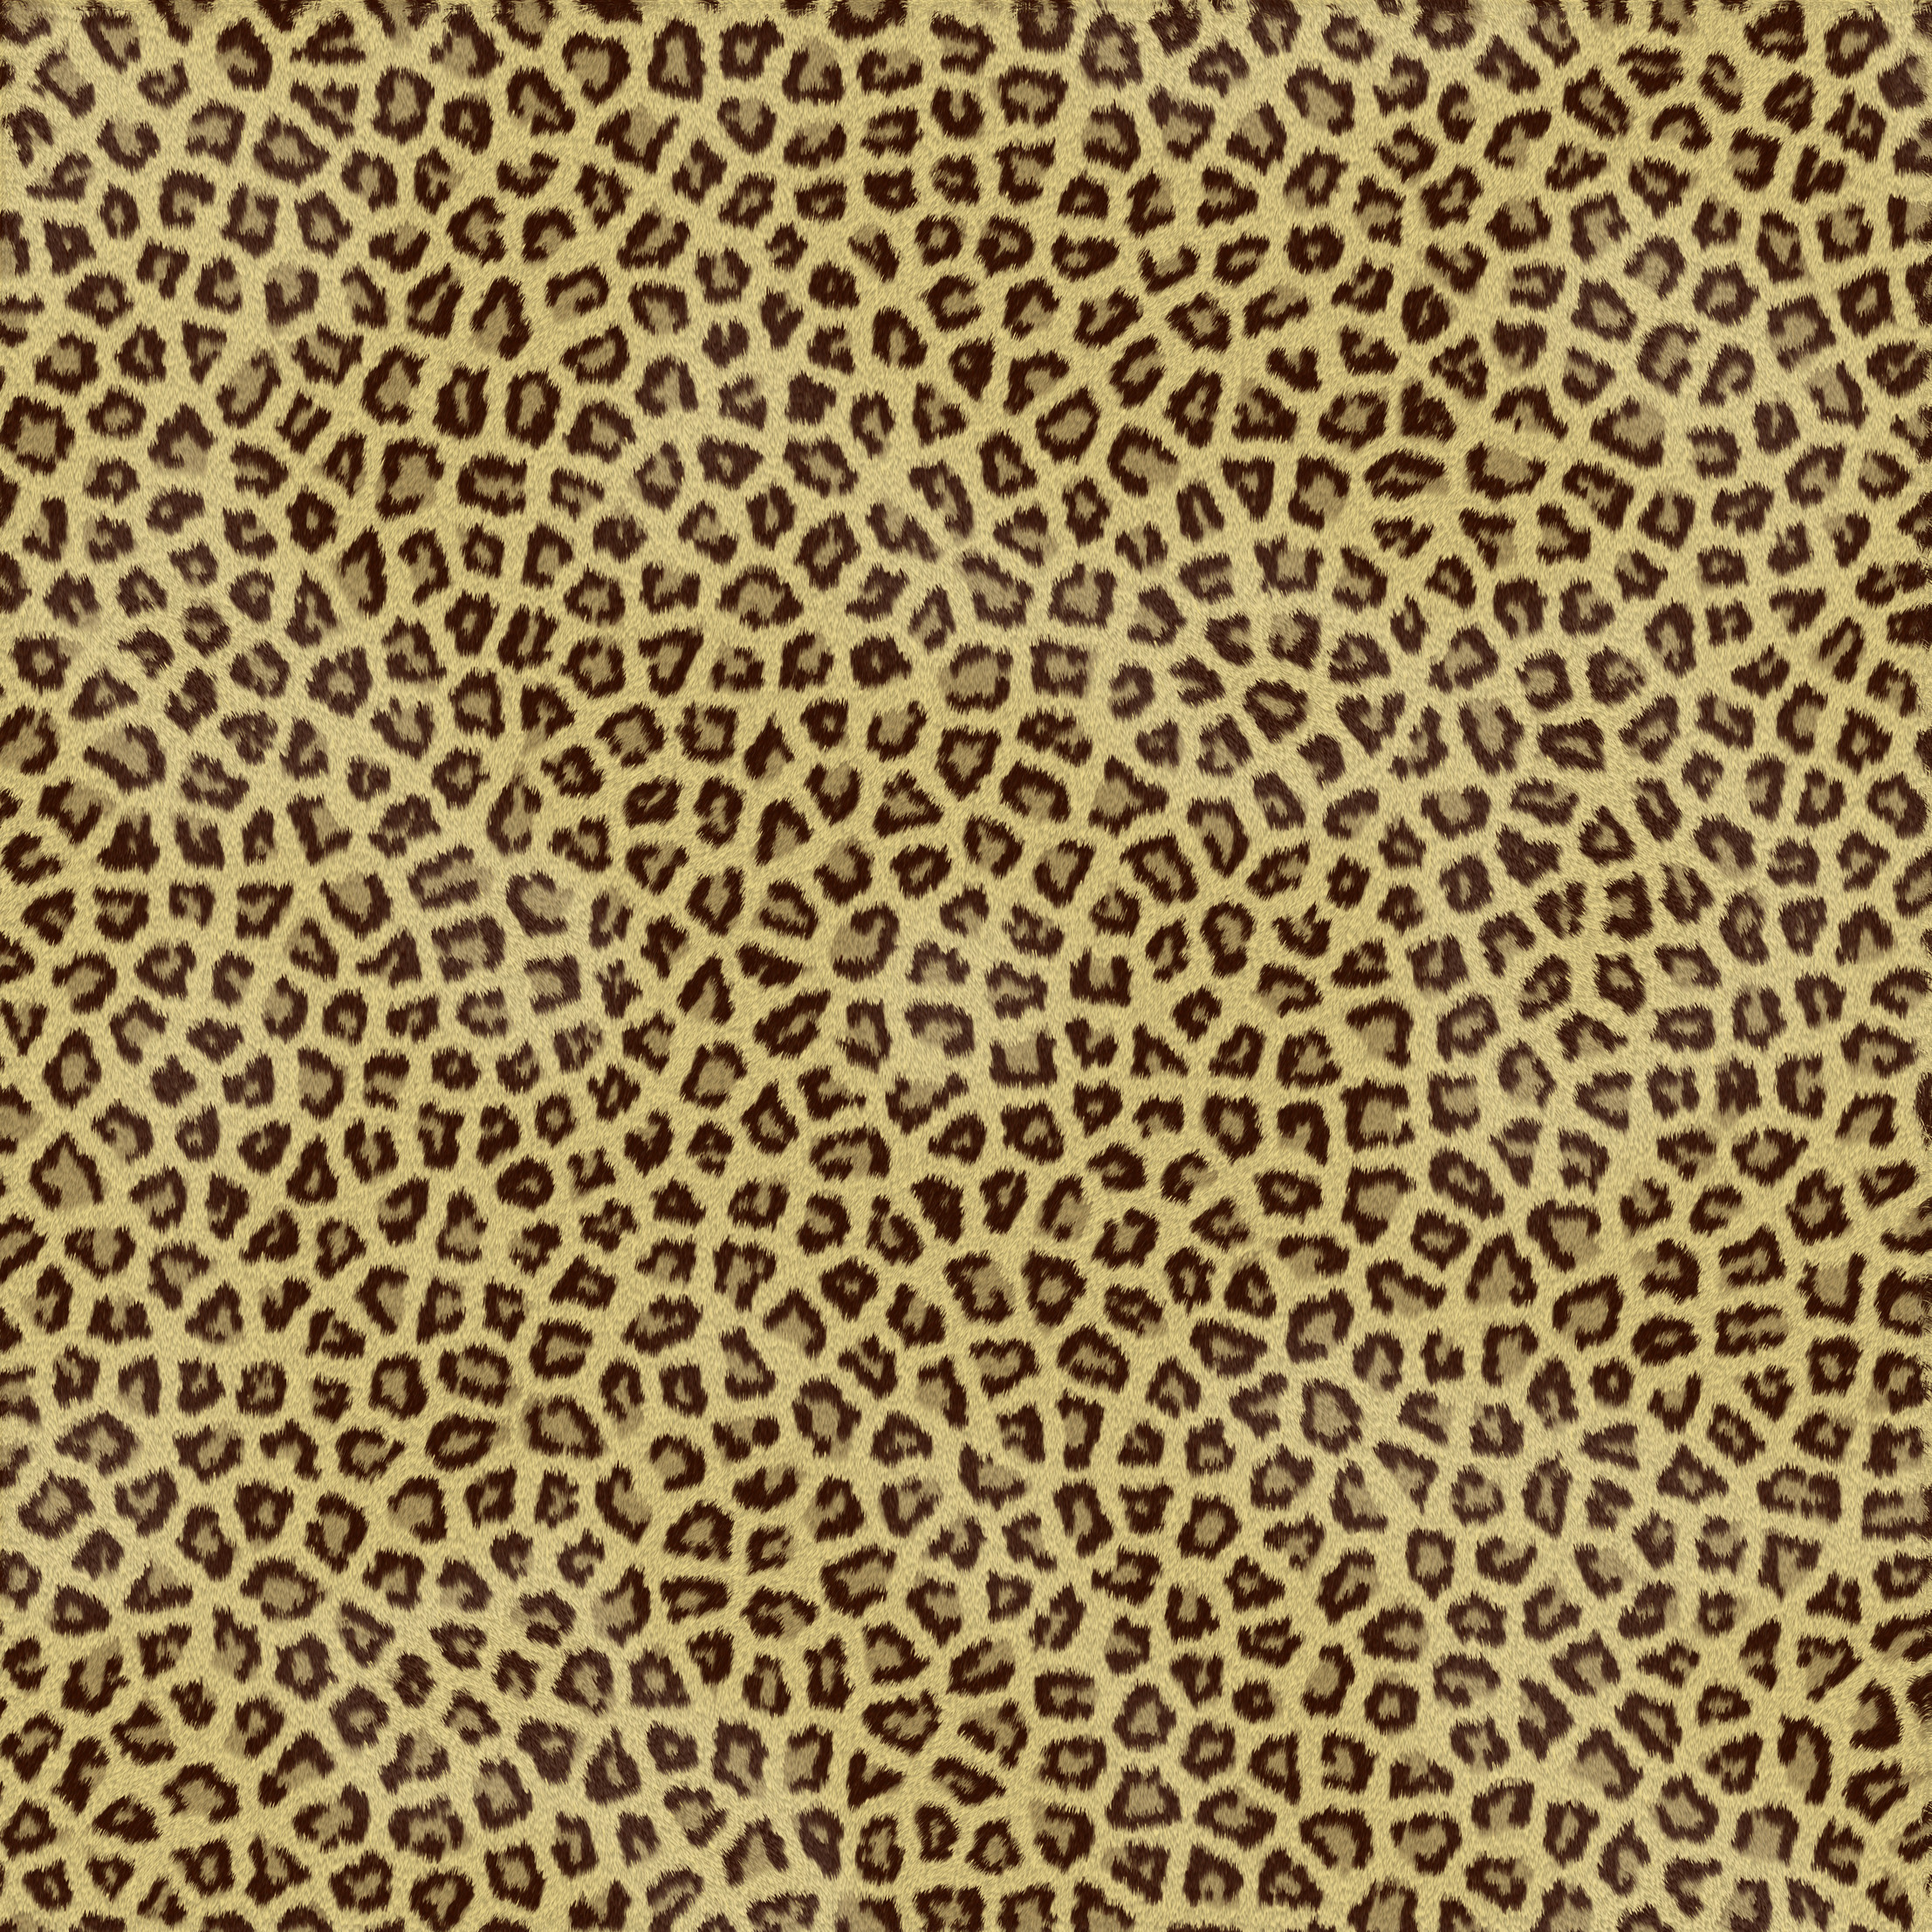 Cheetah Print Background Submited Image